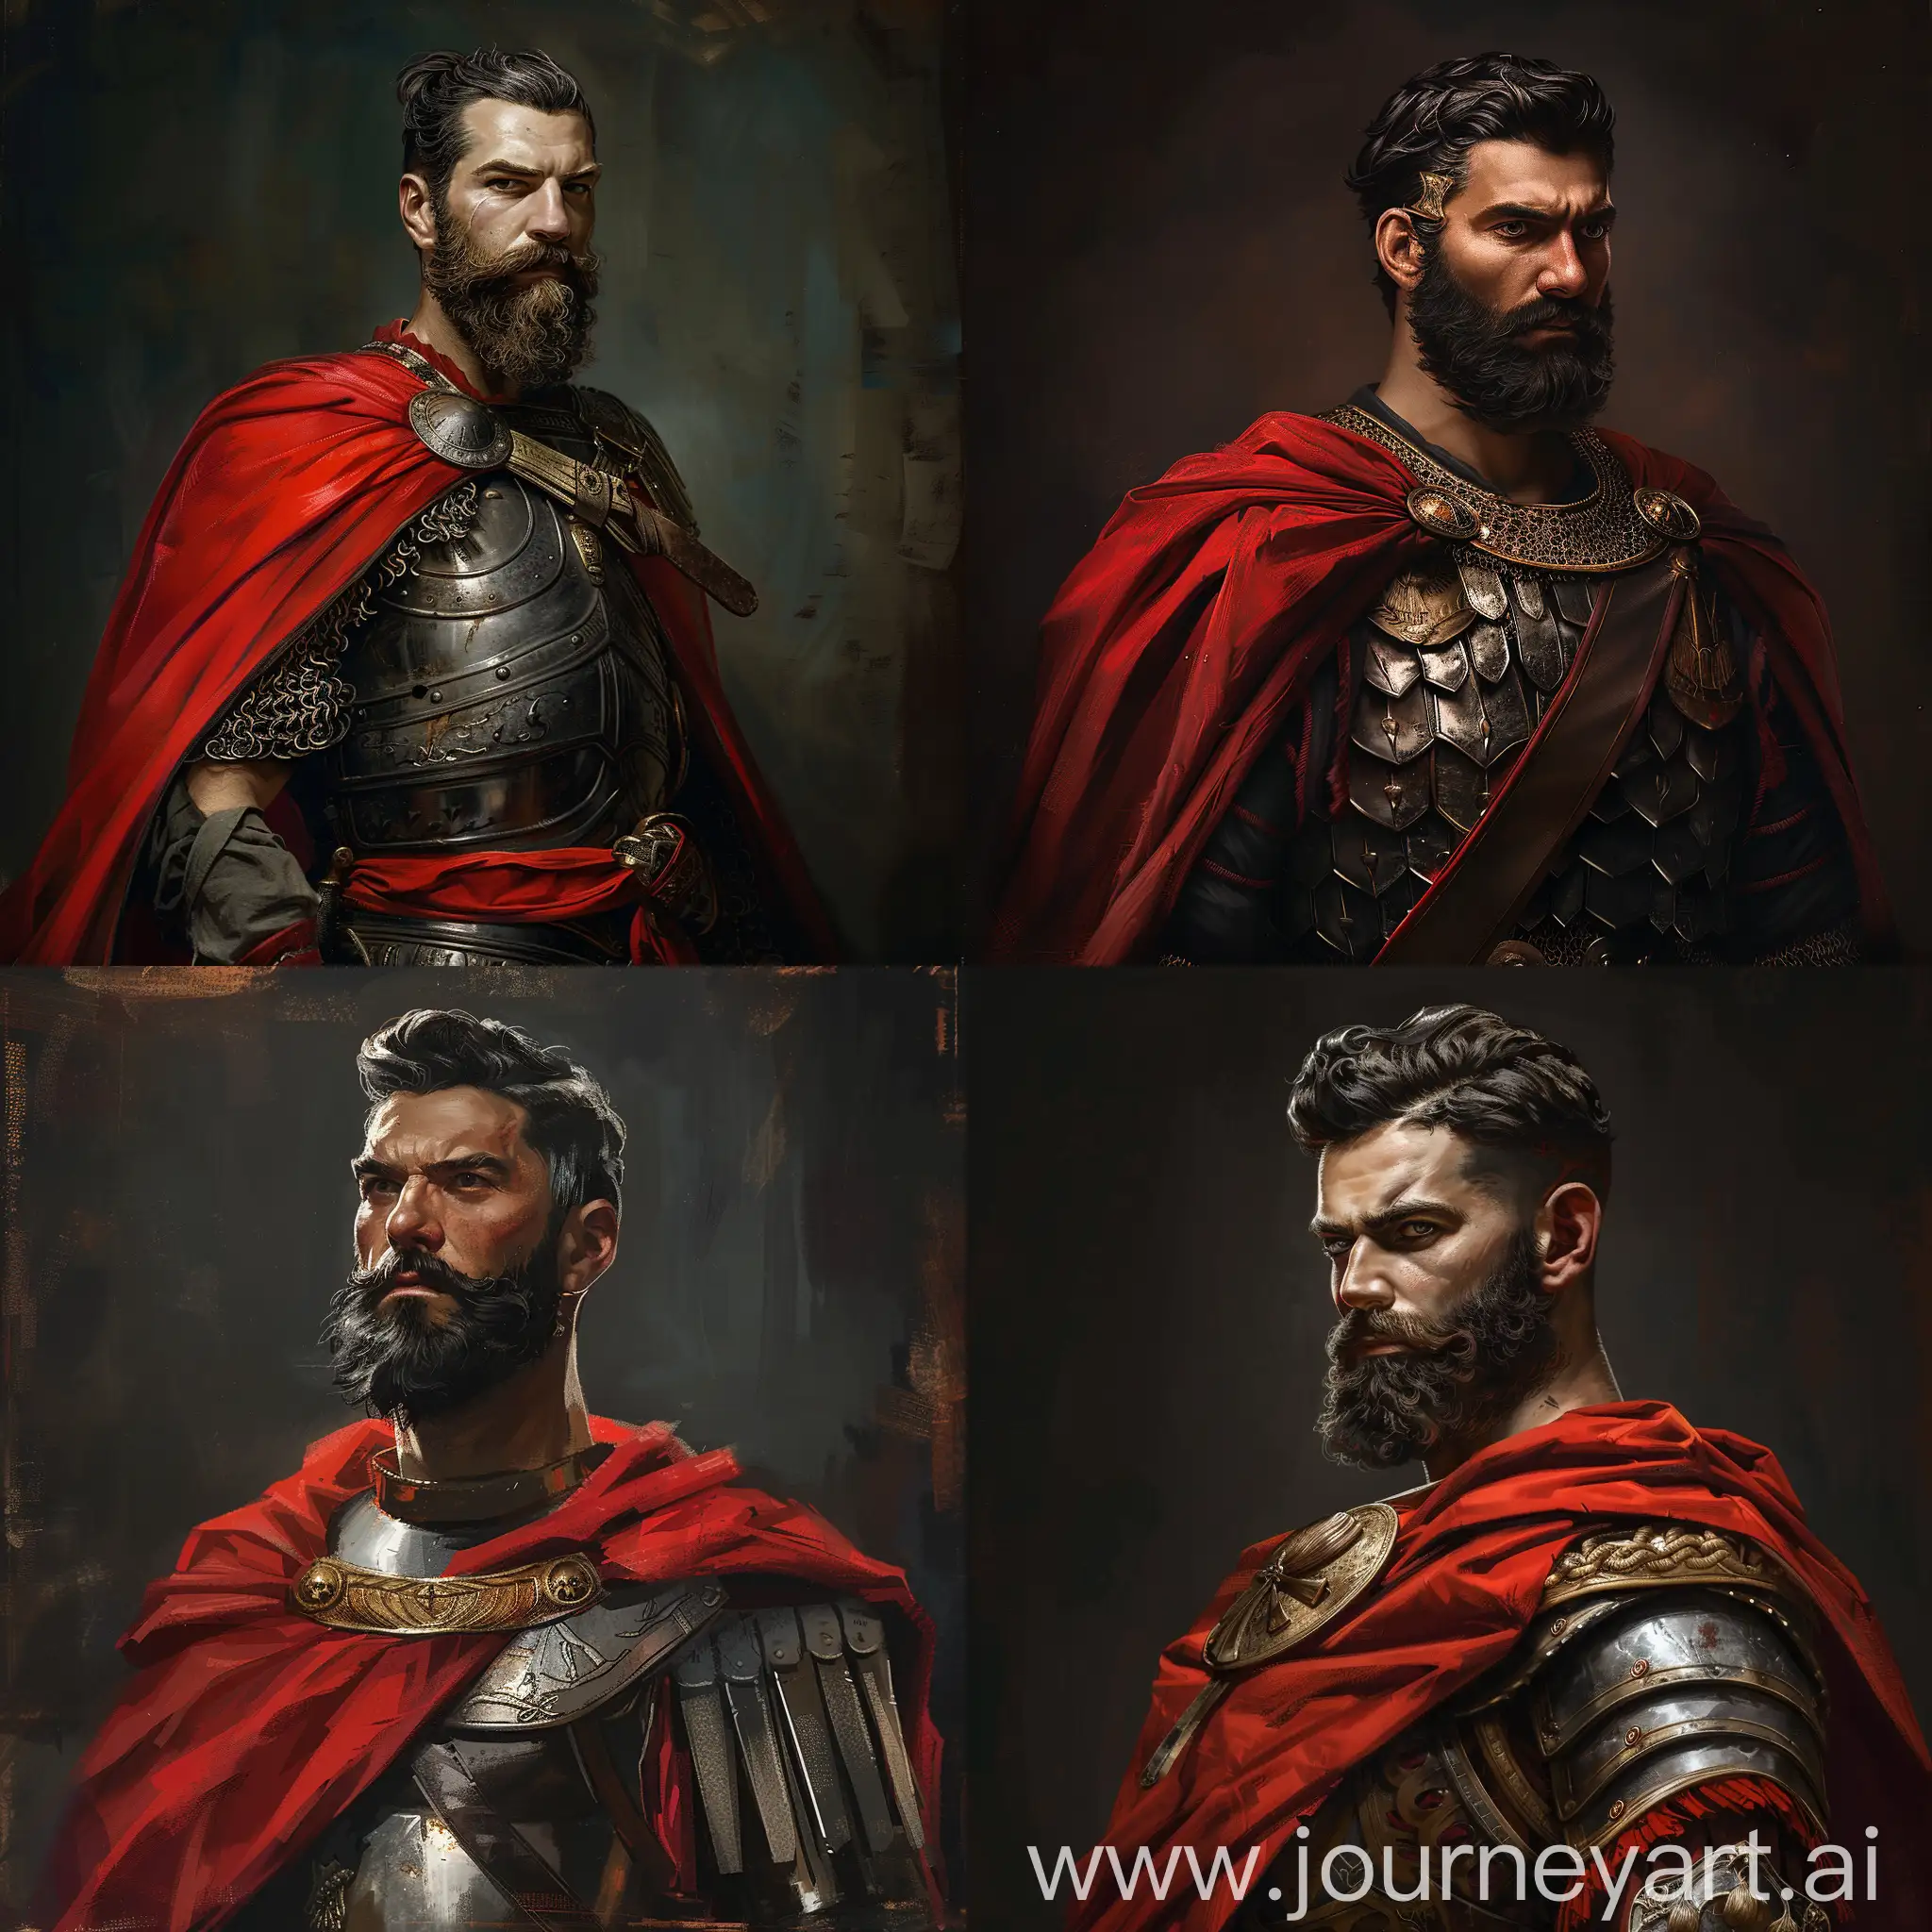 Portrait of Byzantine General Belisarius, depicted in Byzantine armor, red cape, ducktail beard, medium bobbed cut hairstyle, prominent face, brave, cinematic lighting